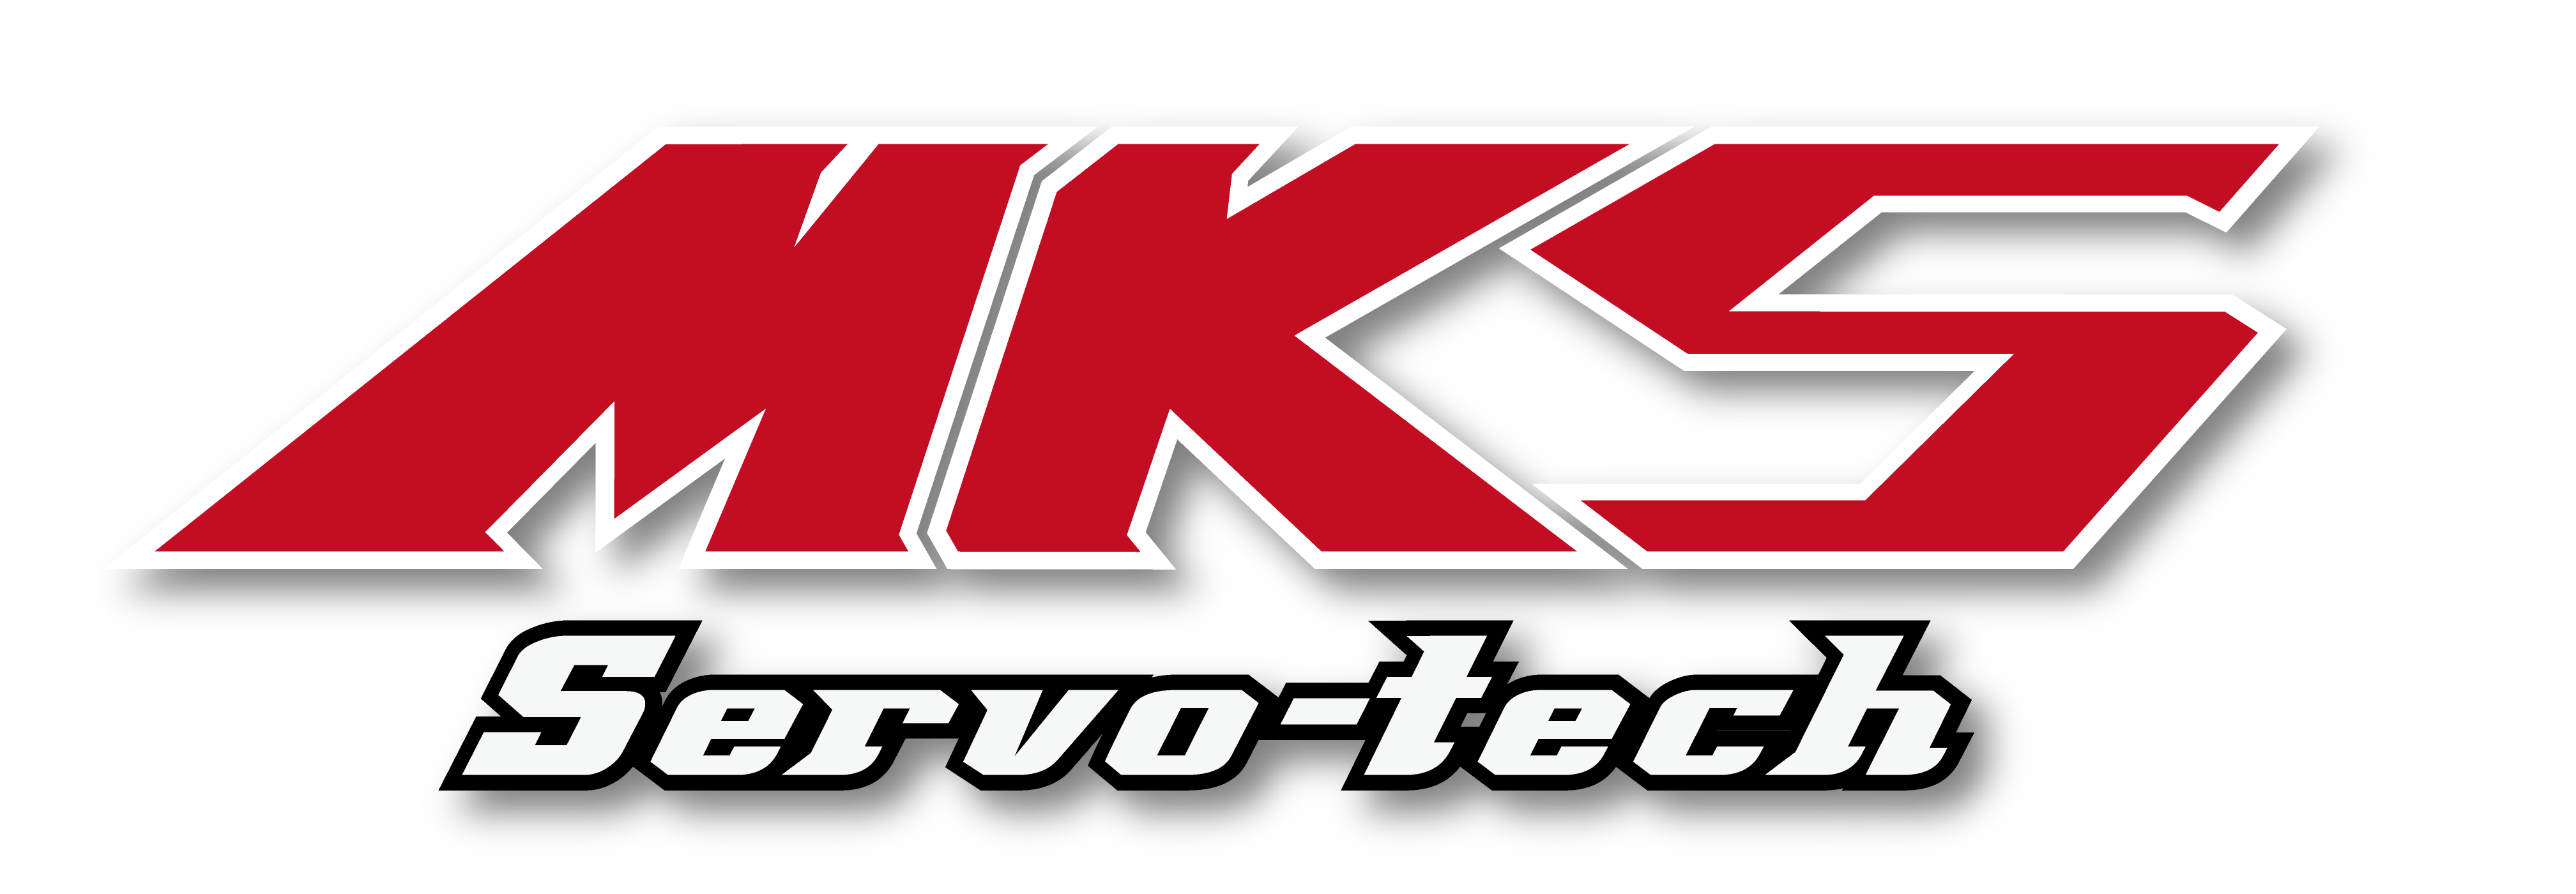 mks-red Logo.png